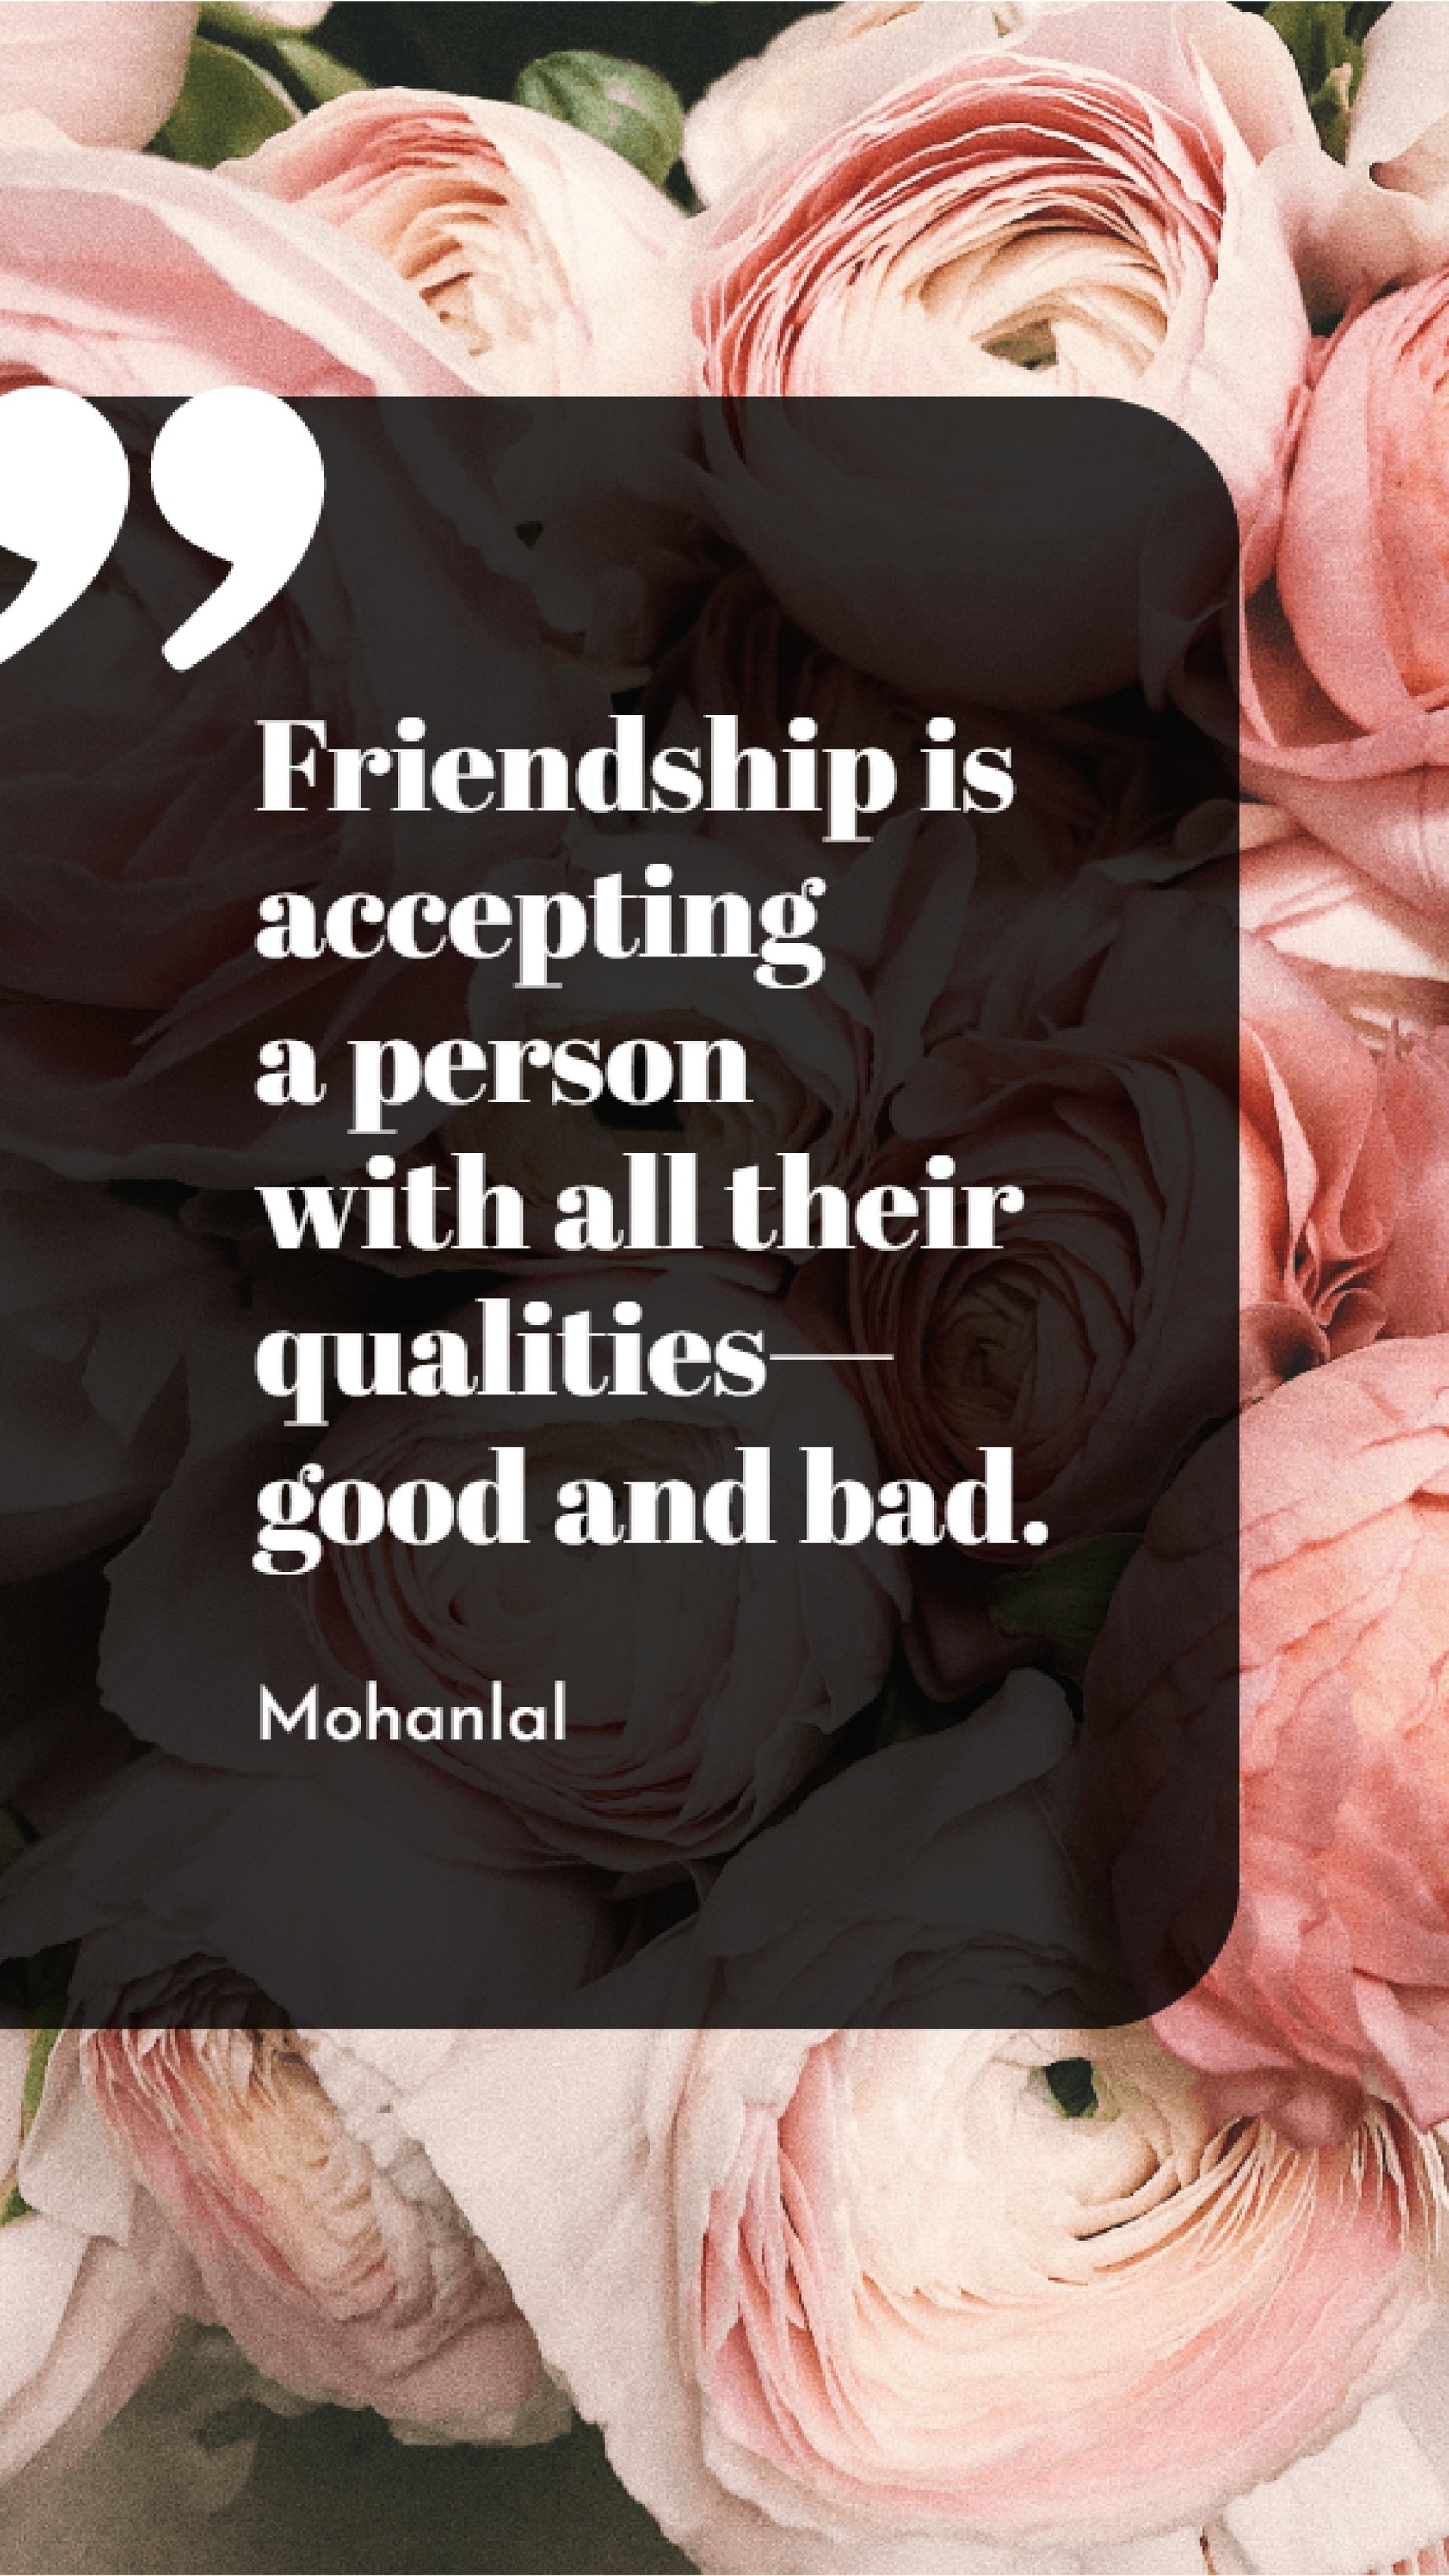 Mohanlal - Friendship is accepting a person with all their qualities - good and bad. Template